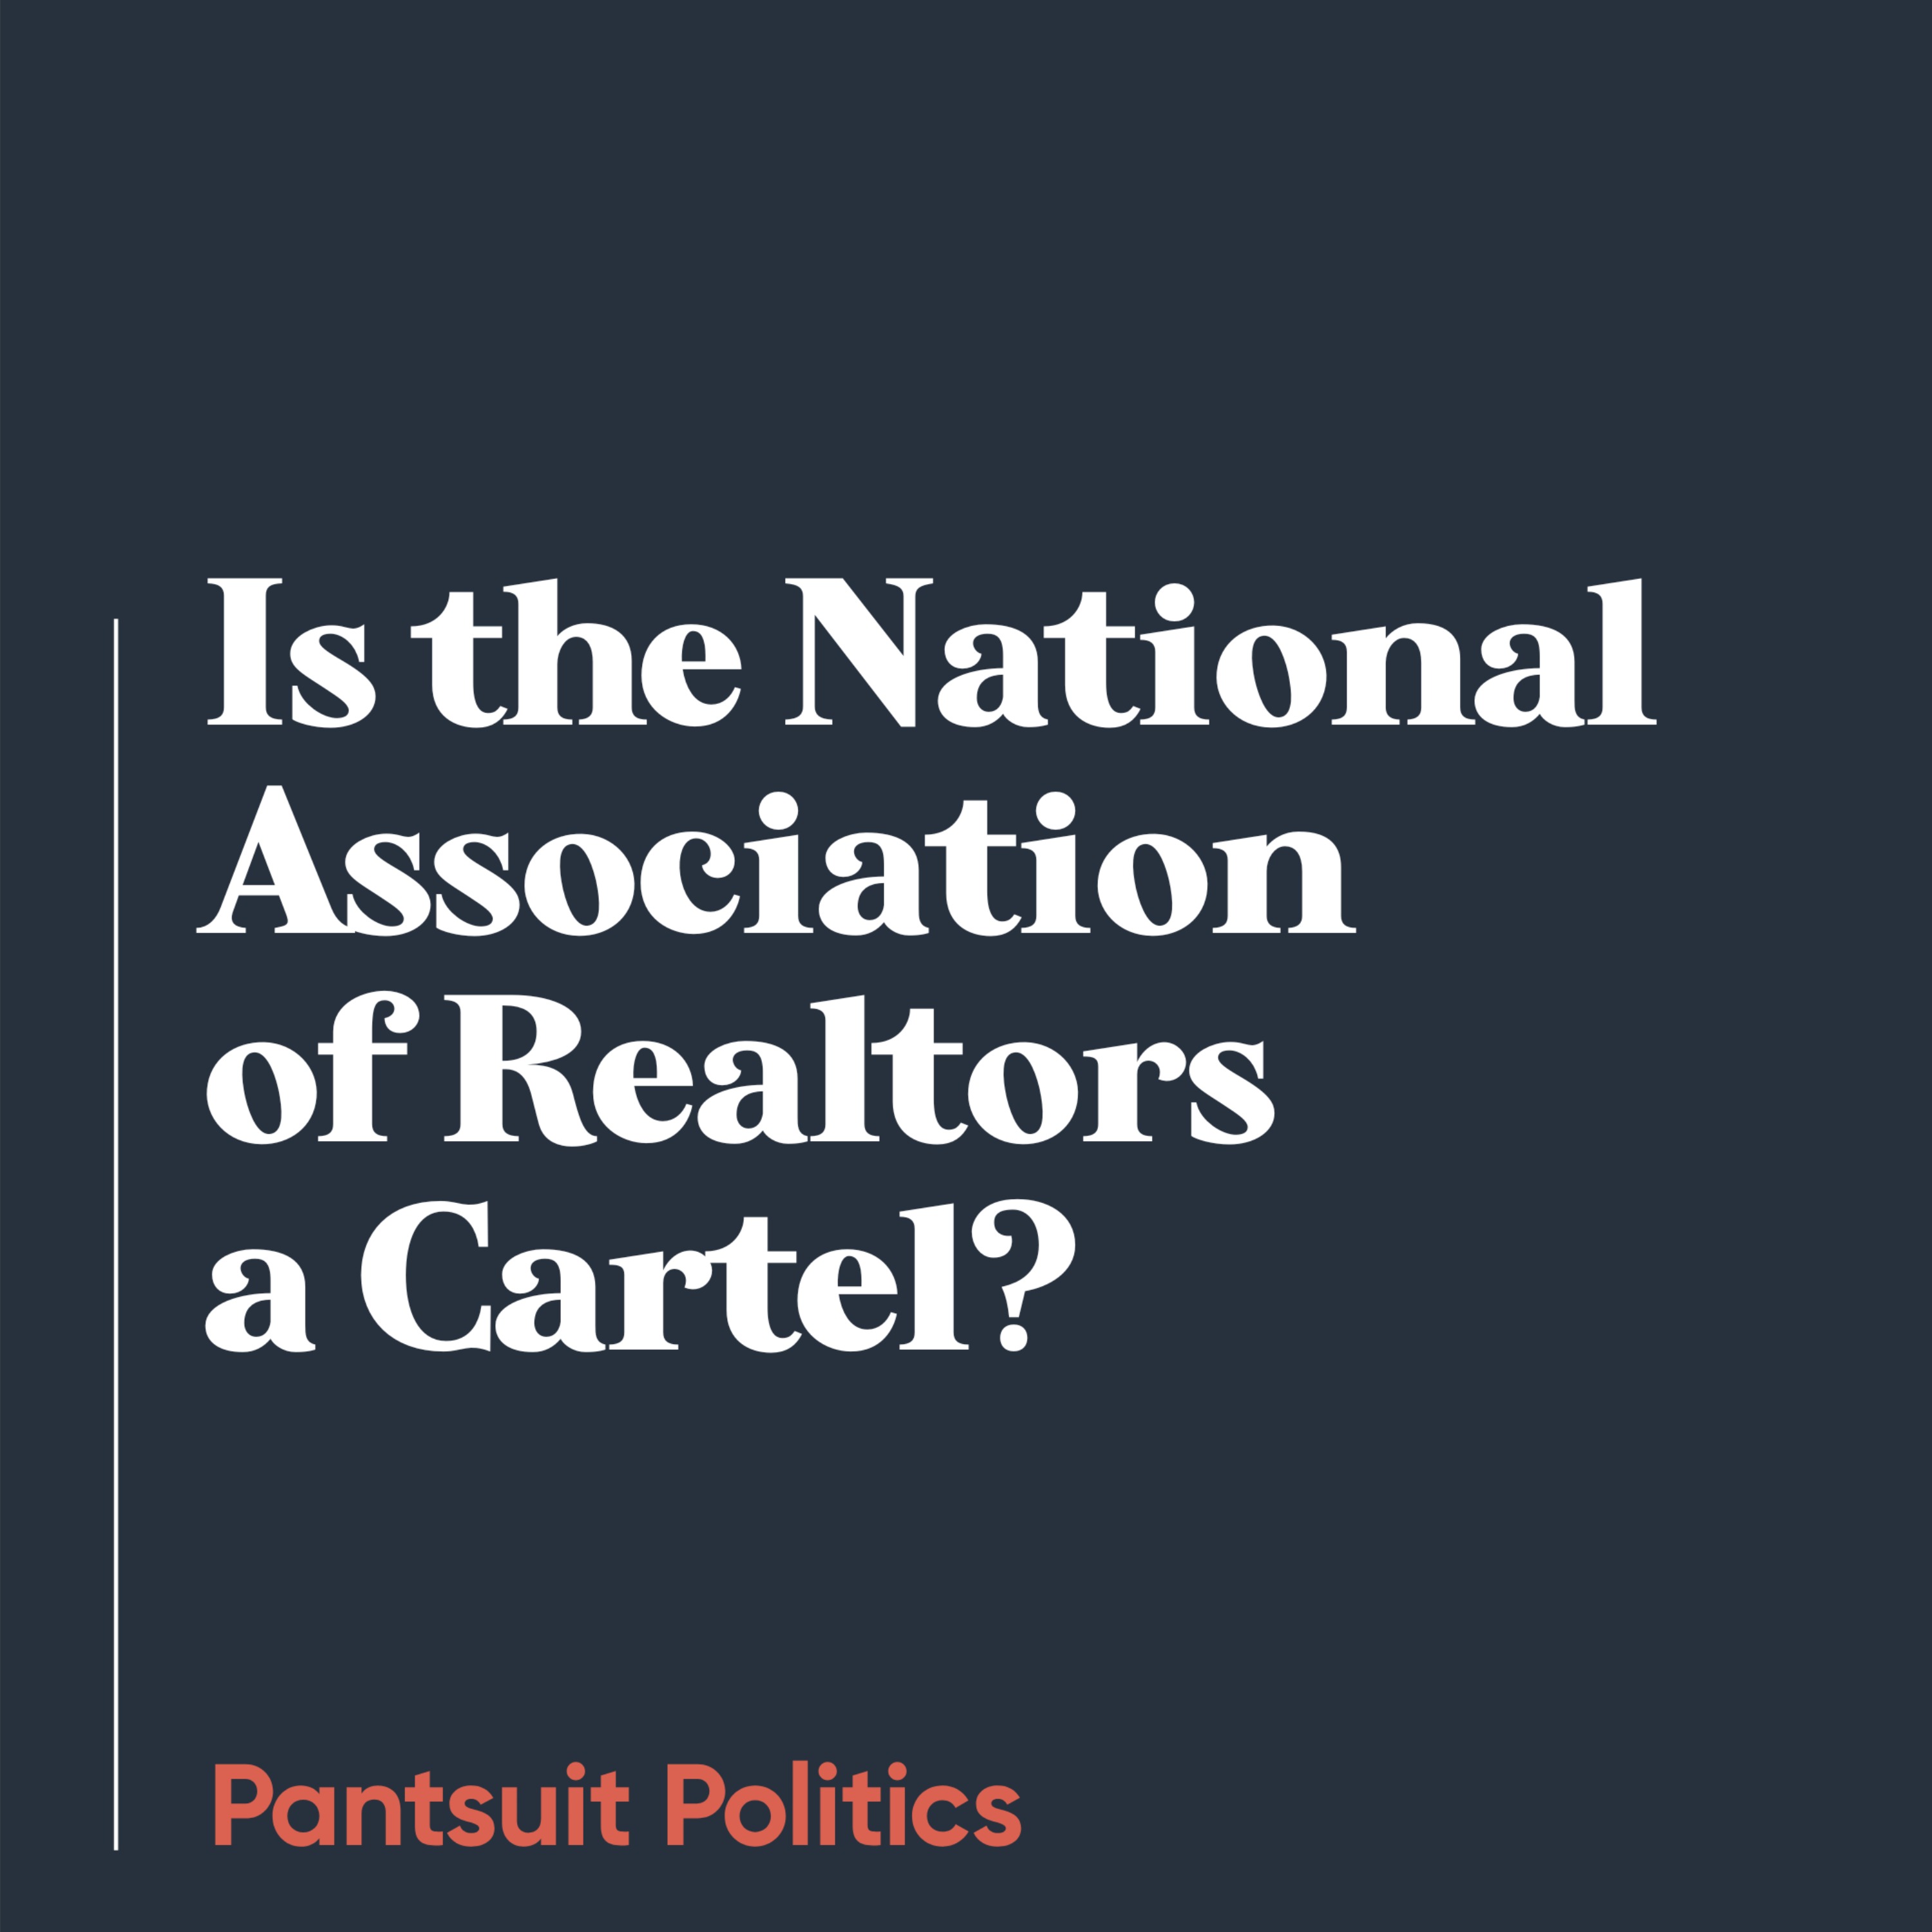 Is the National Association of Realtors a Cartel?